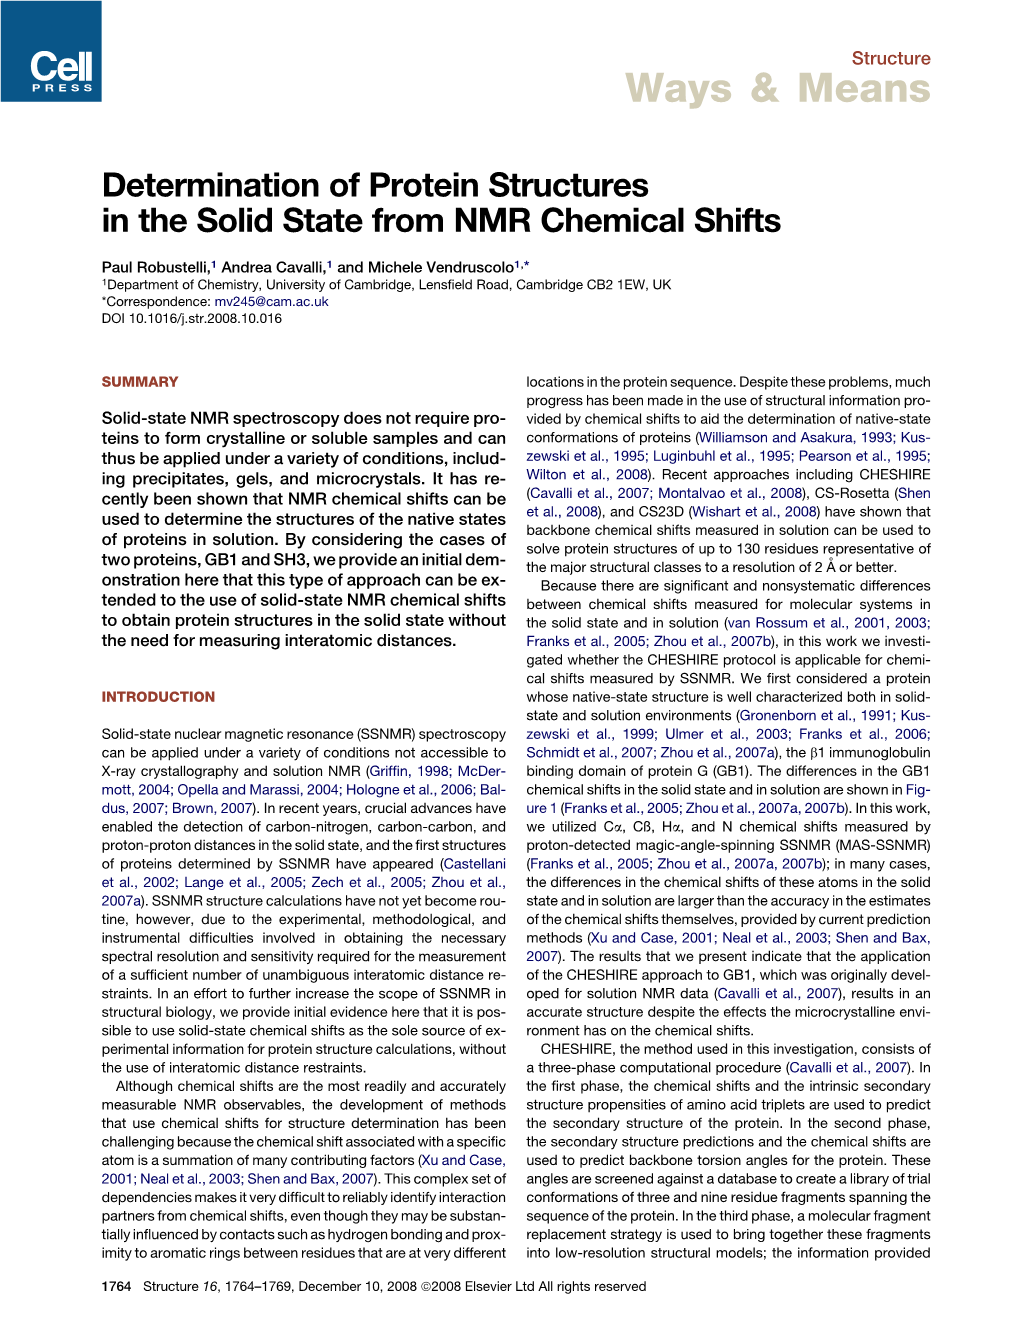 Determination of Protein Structures in the Solid State from NMR Chemical Shifts